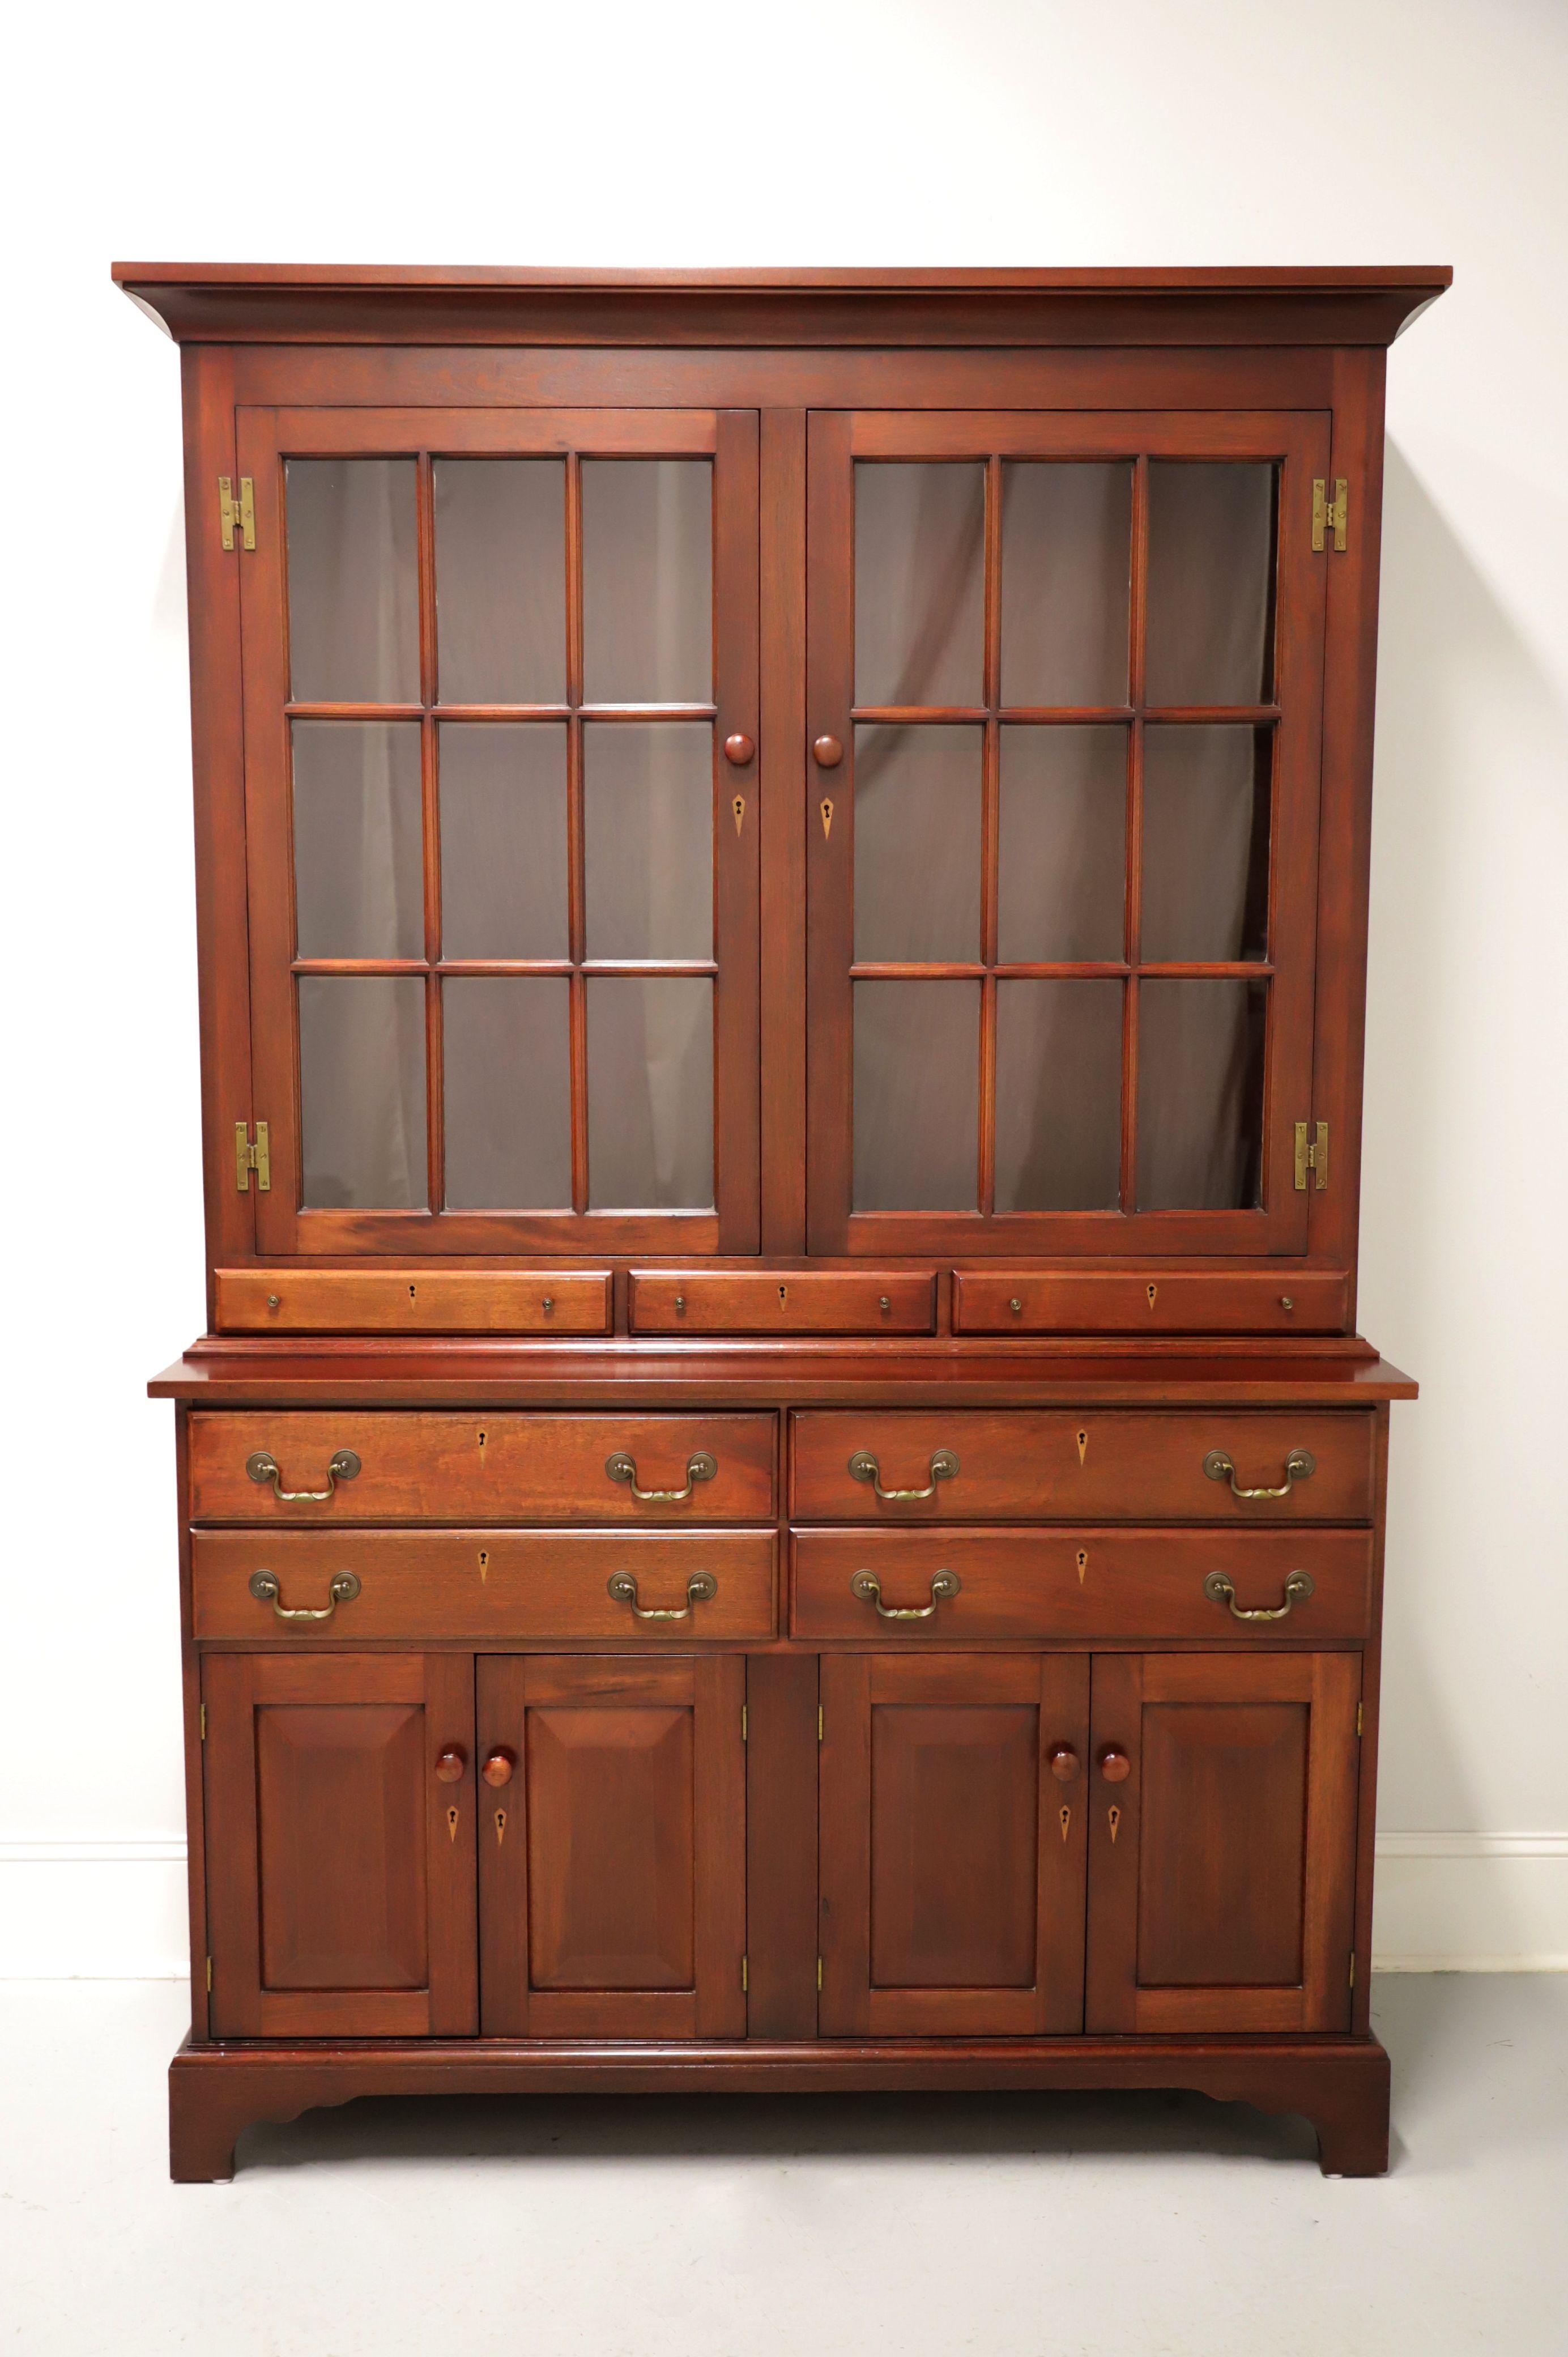 A Colonial style china cabinet hutch, no branding marks found, attributed to Benbow's. Solid mahogany with brass hardware, crown molding, and bracket feet. Upper cabinet features dual nine-paned glass doors with wood knobs revealing two fixed wood